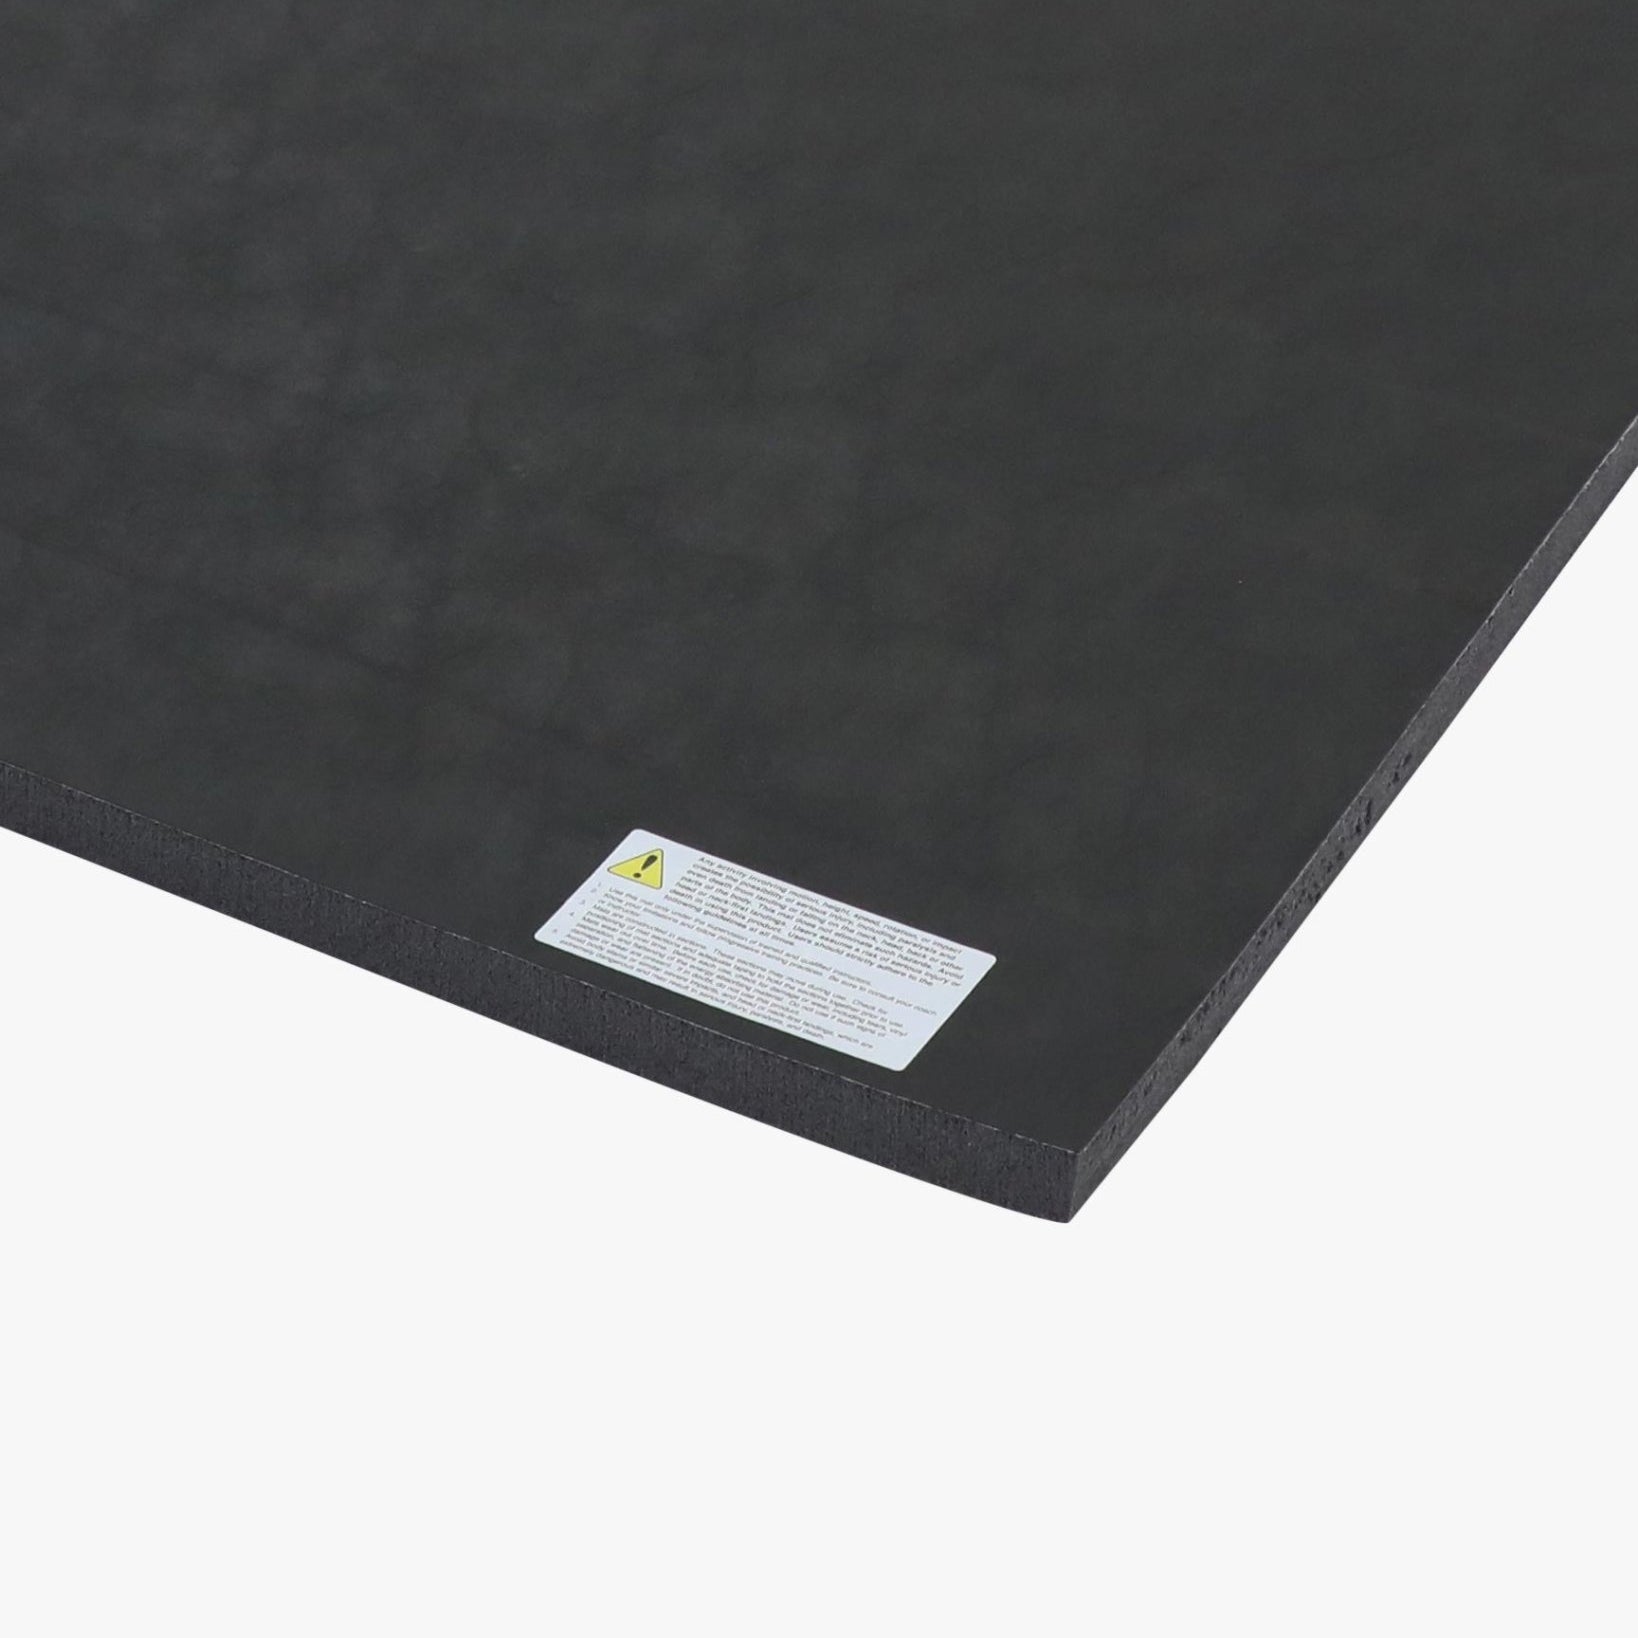 Custom Rollout Mat - .8" Thick